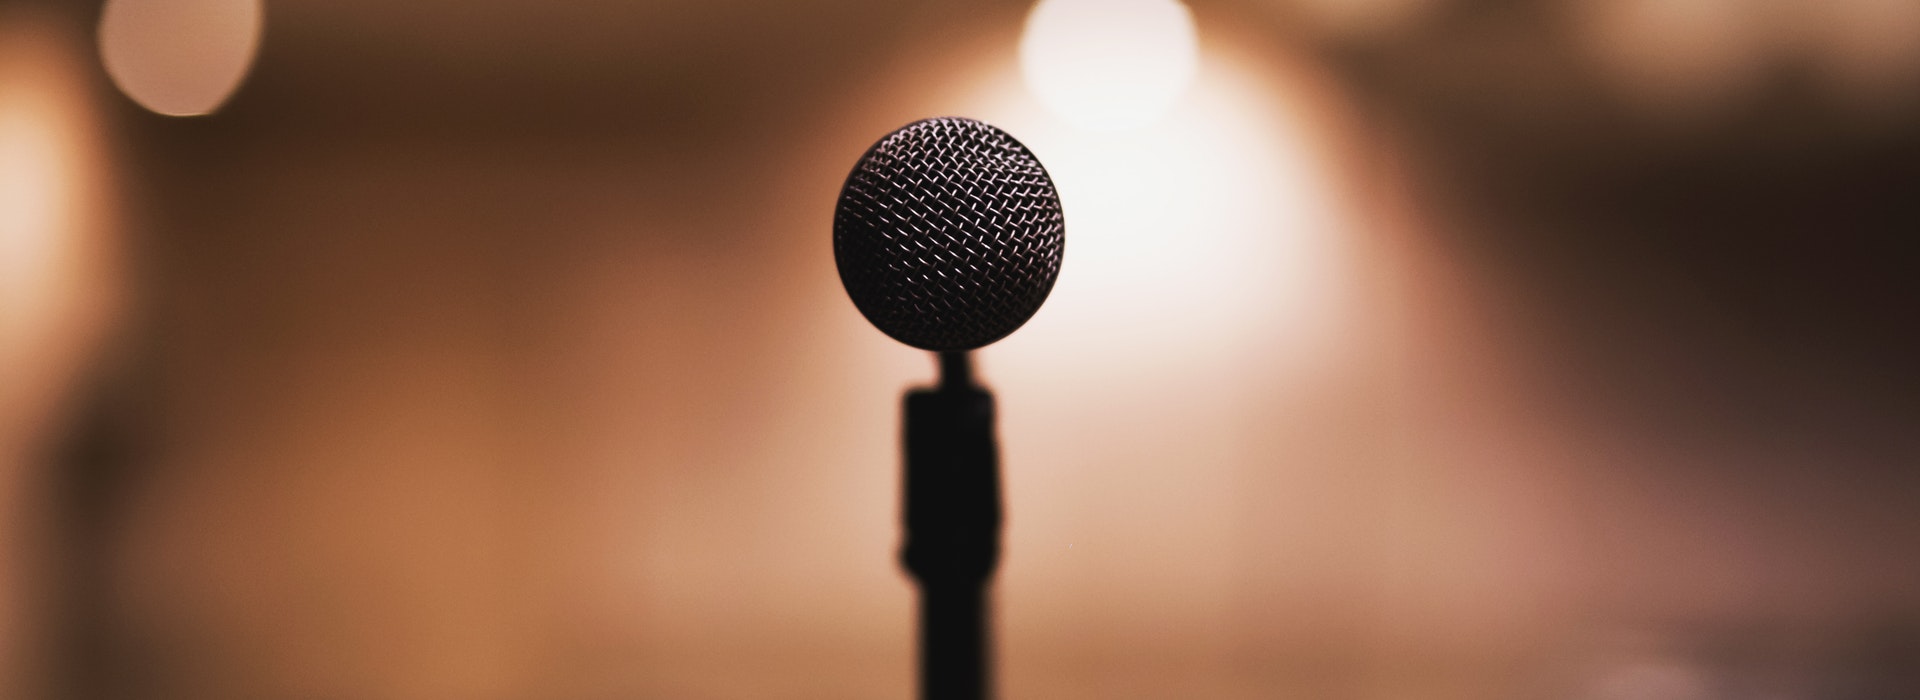 Closeup photo of a microphone against a blurry brown background